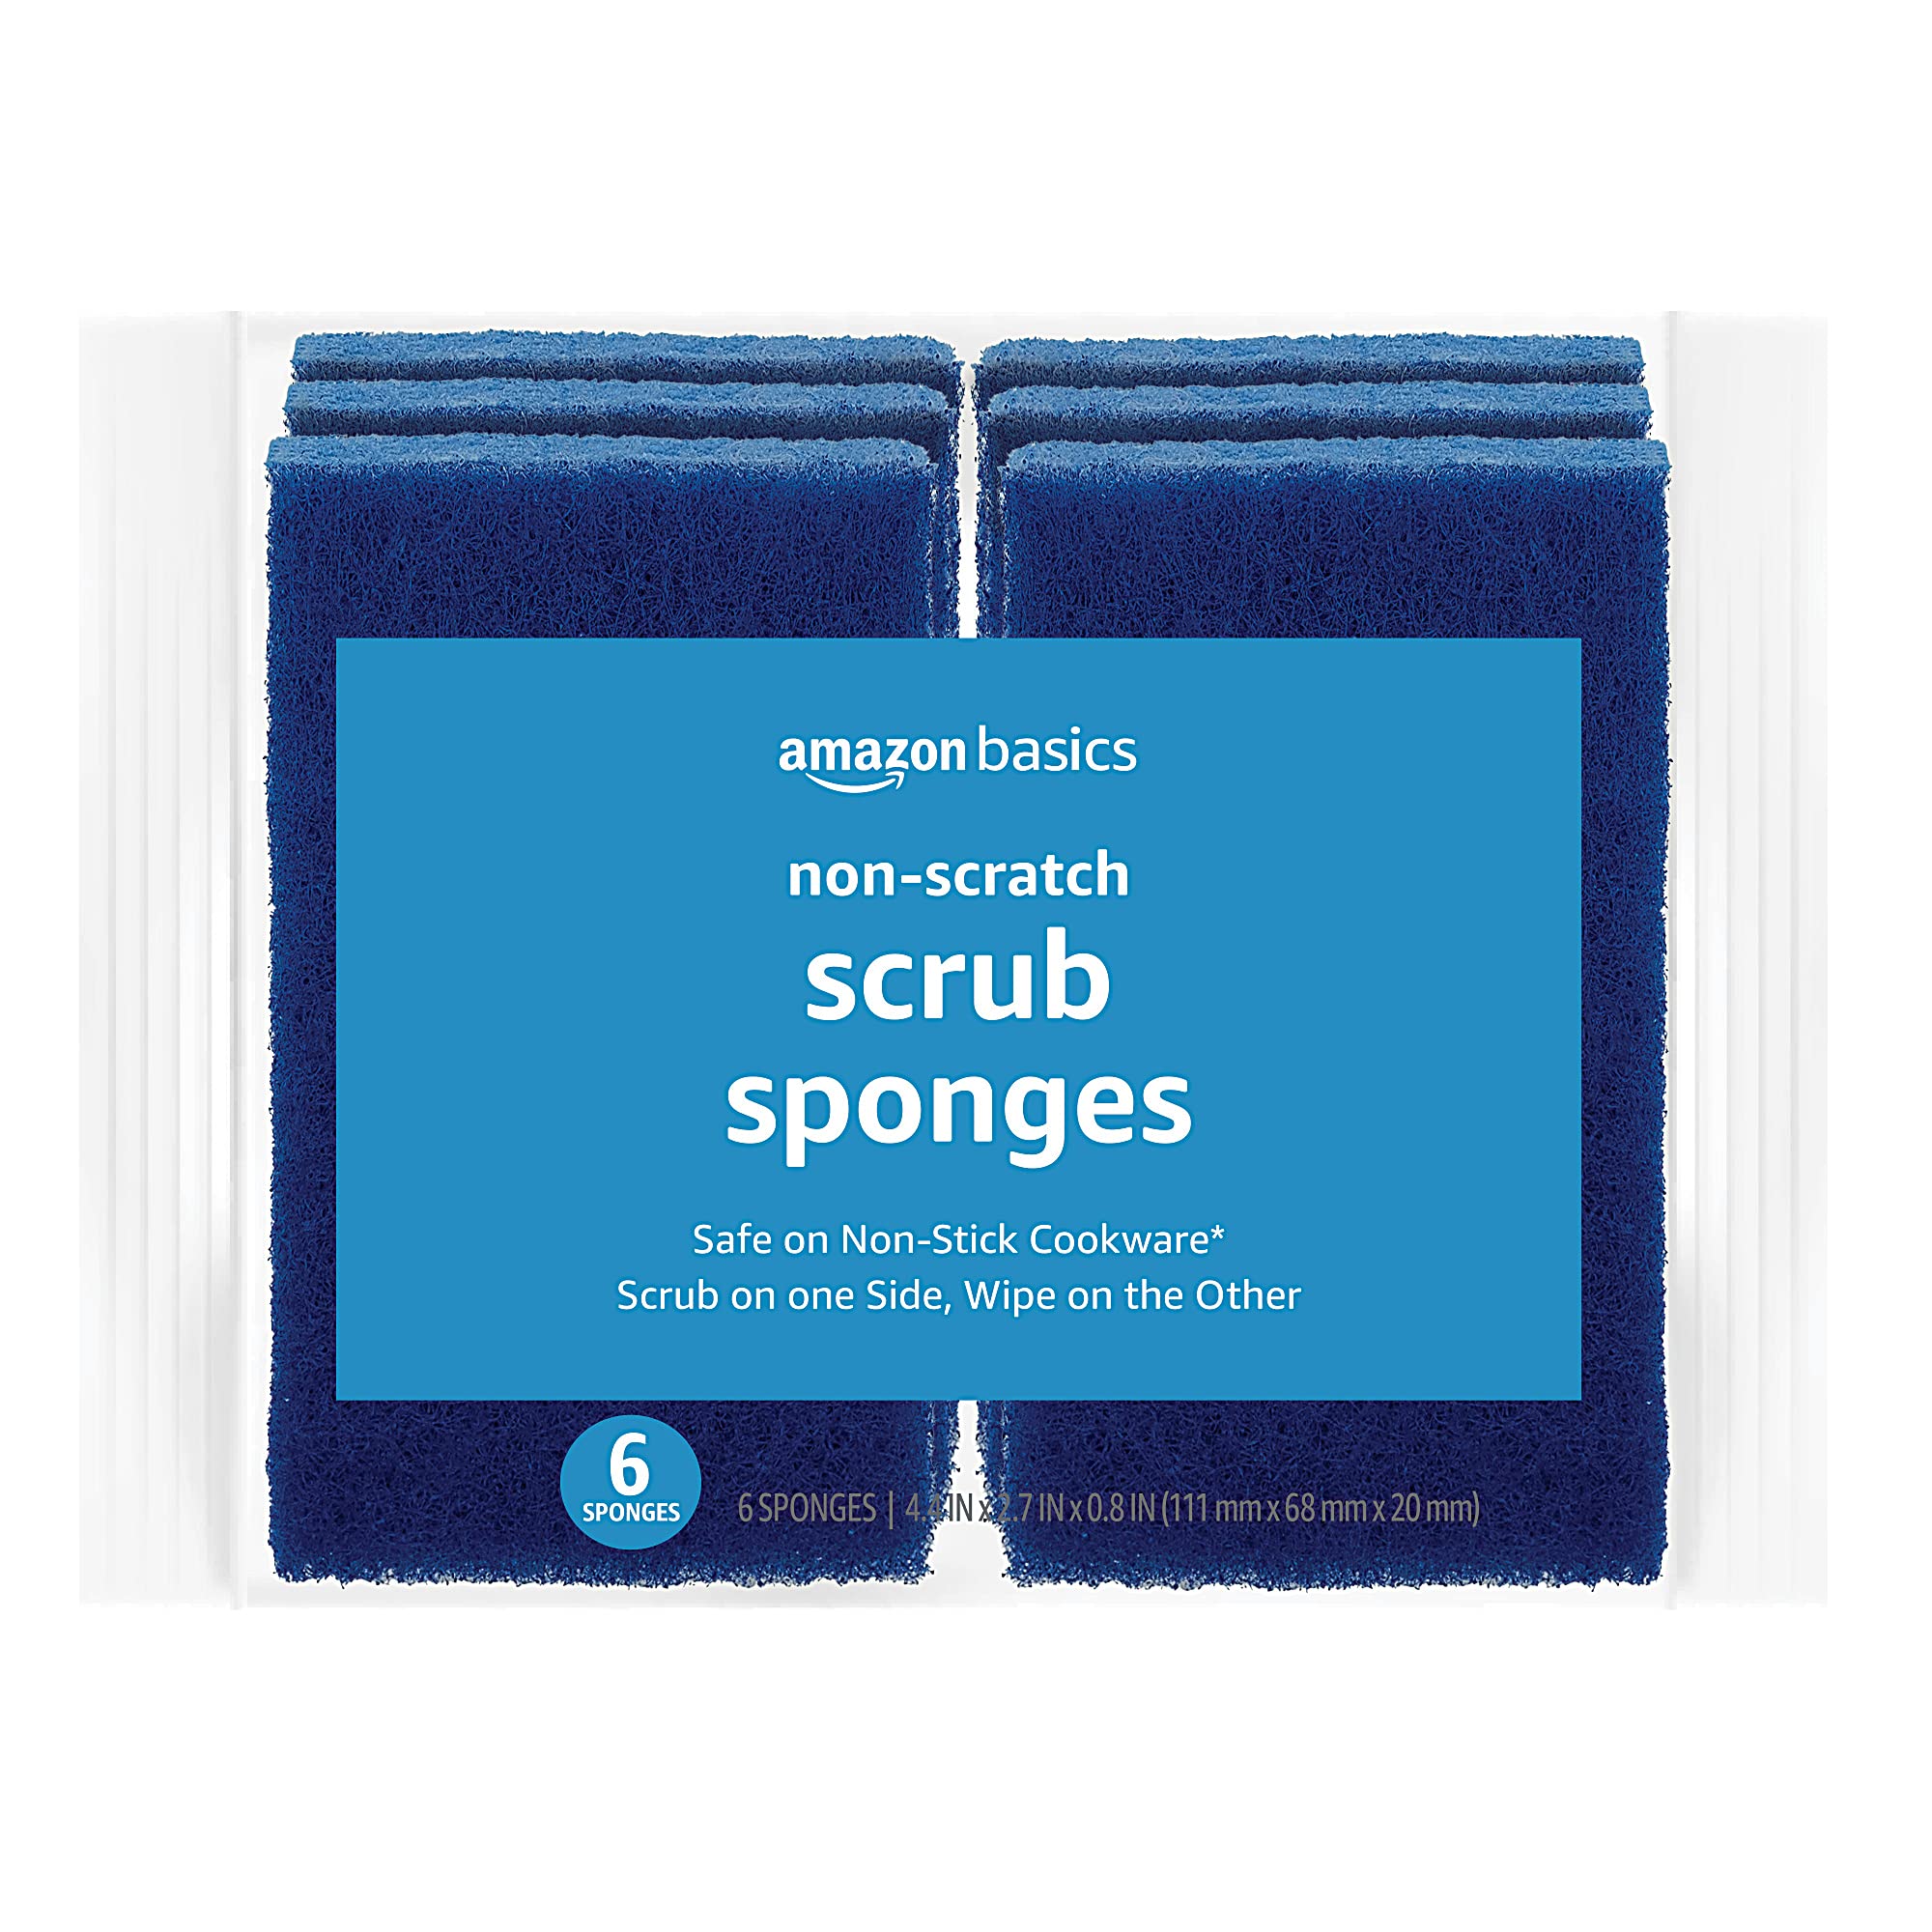 6-Pack Amazon Basics Scrub Sponges (Non-Scratch or Heavy Duty) $3.50 + Free Shipping w/ Prime or on $25+